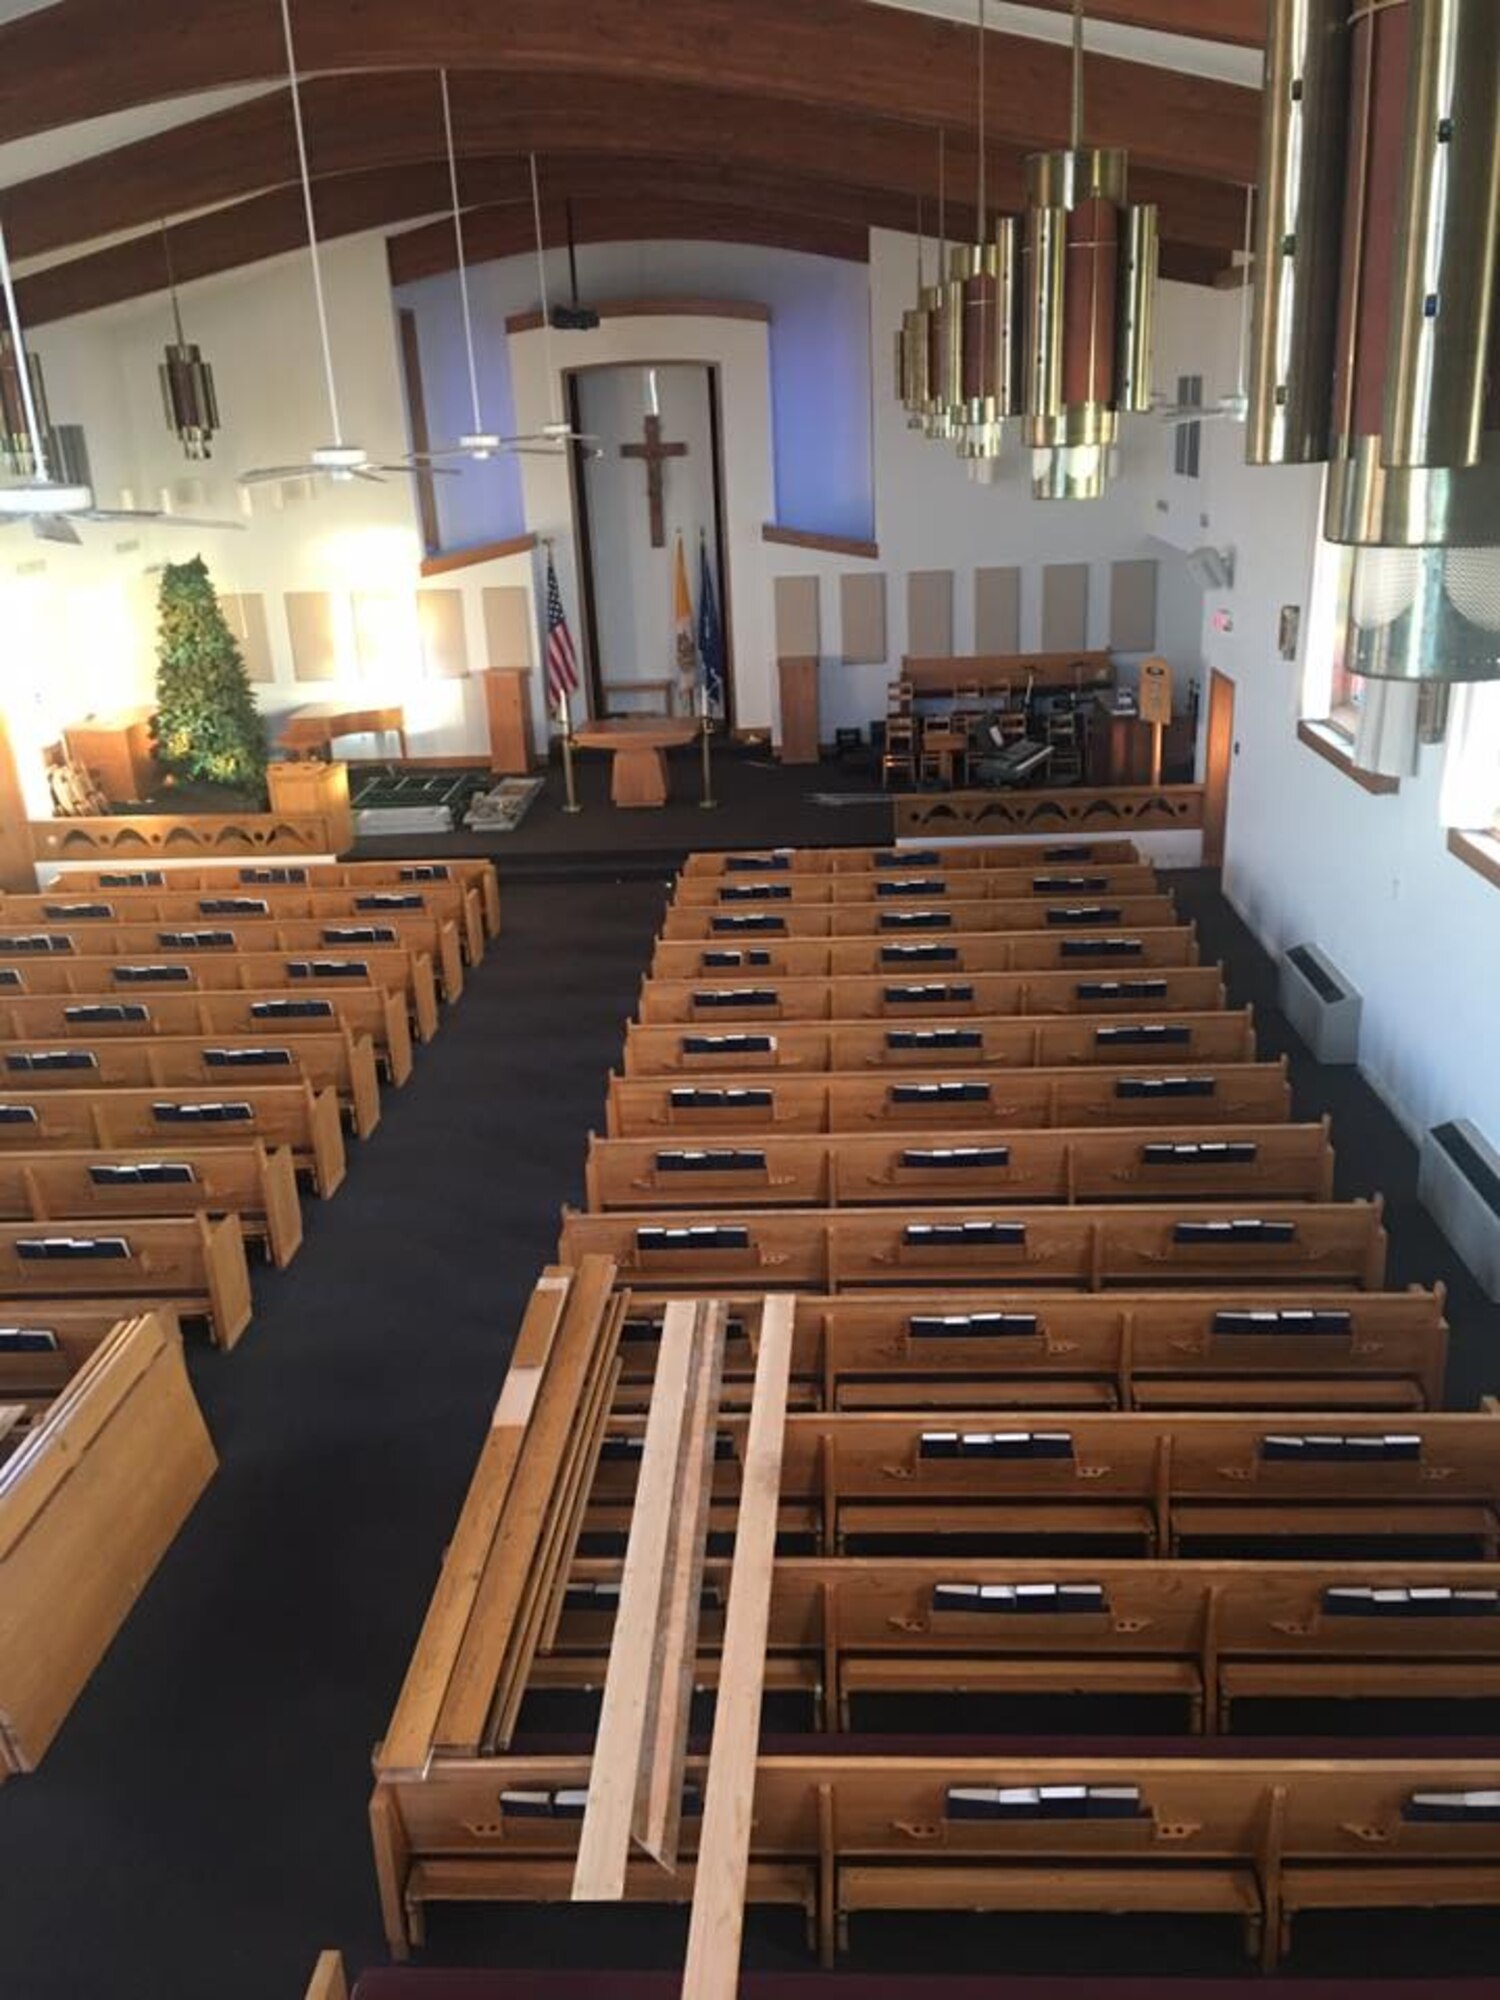 The chapel sanctuary and blessed sacrament rooms will receive new carpeting, trim, wood fixtures, curtains, rods,
and doors to match historic colors of chapel structure at Whiteman Air Force Base, Mo., Jan. 7 through April 16, 2017. In the mean time, all Protestant and Catholic services will be held at the base theater.